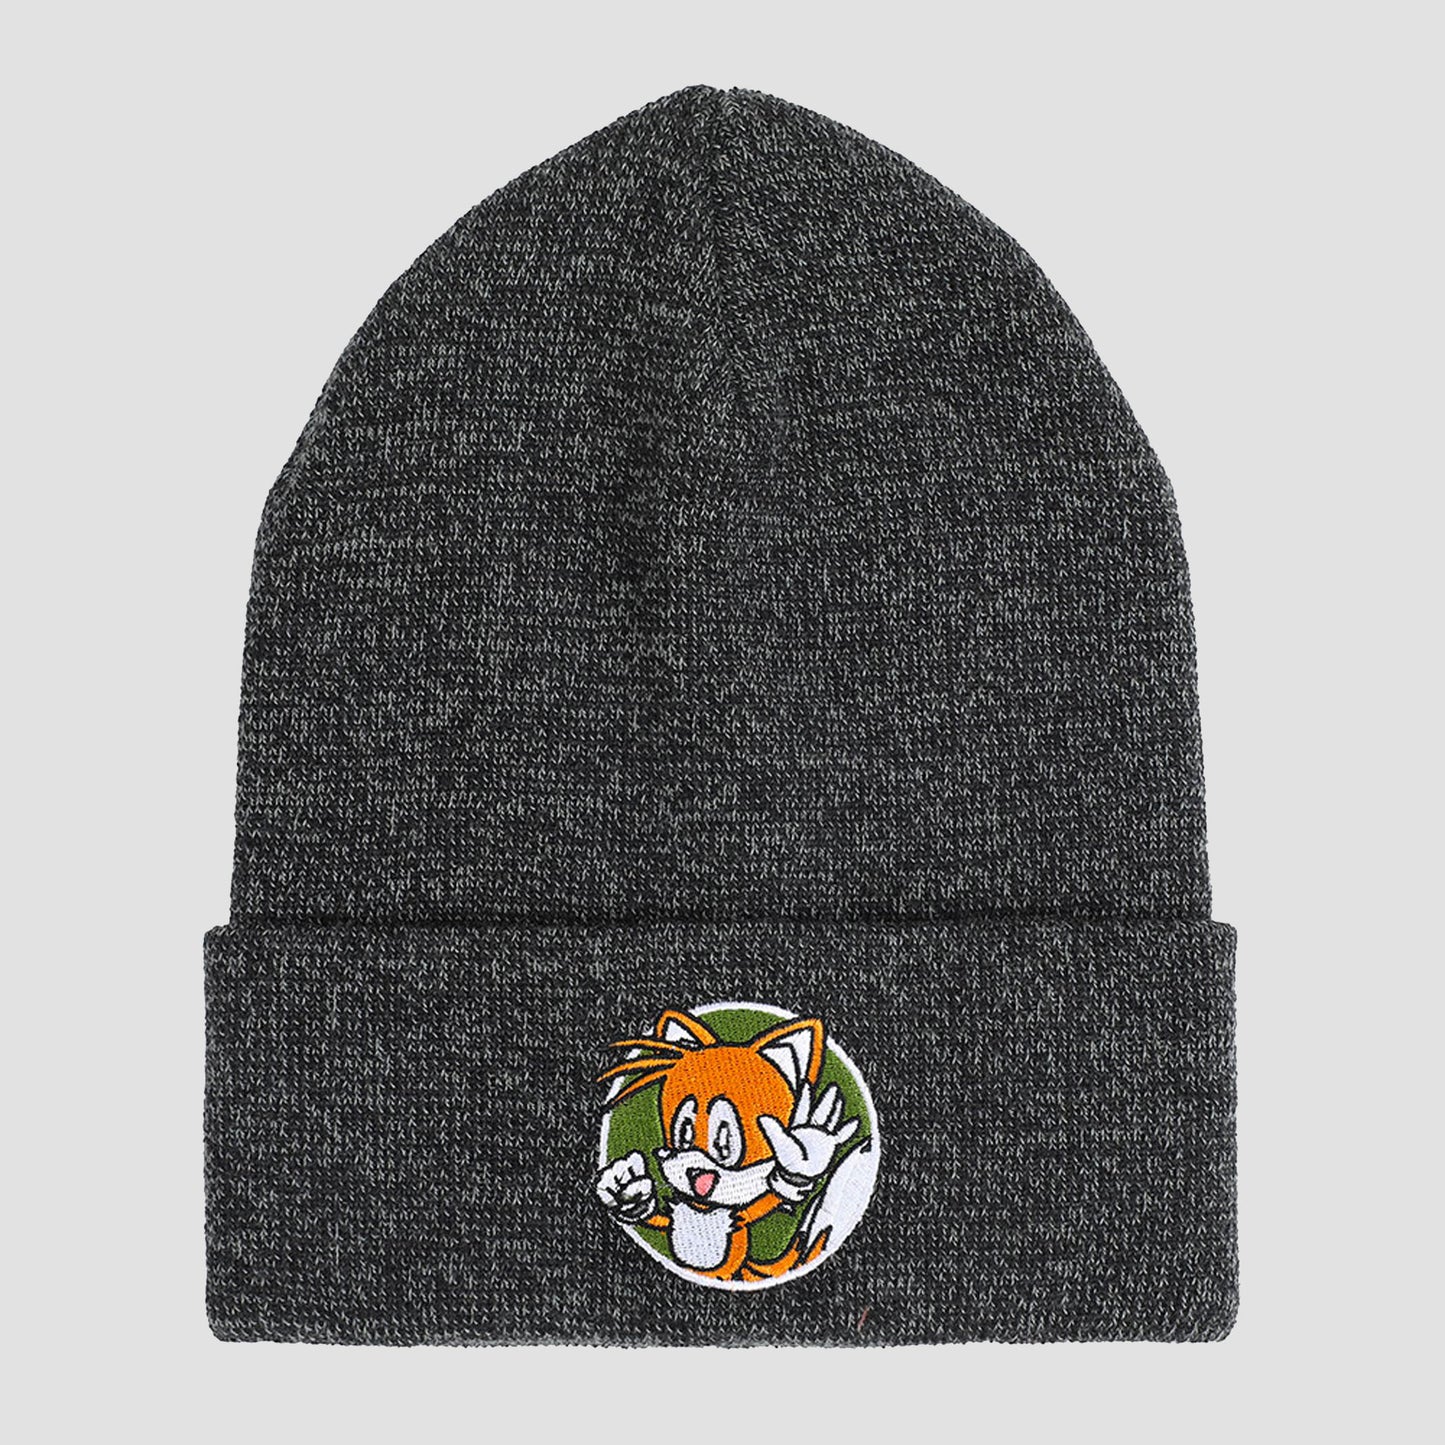 Tails (Sonic the Hedgehog) Embroidered Cuff Beanie Hat